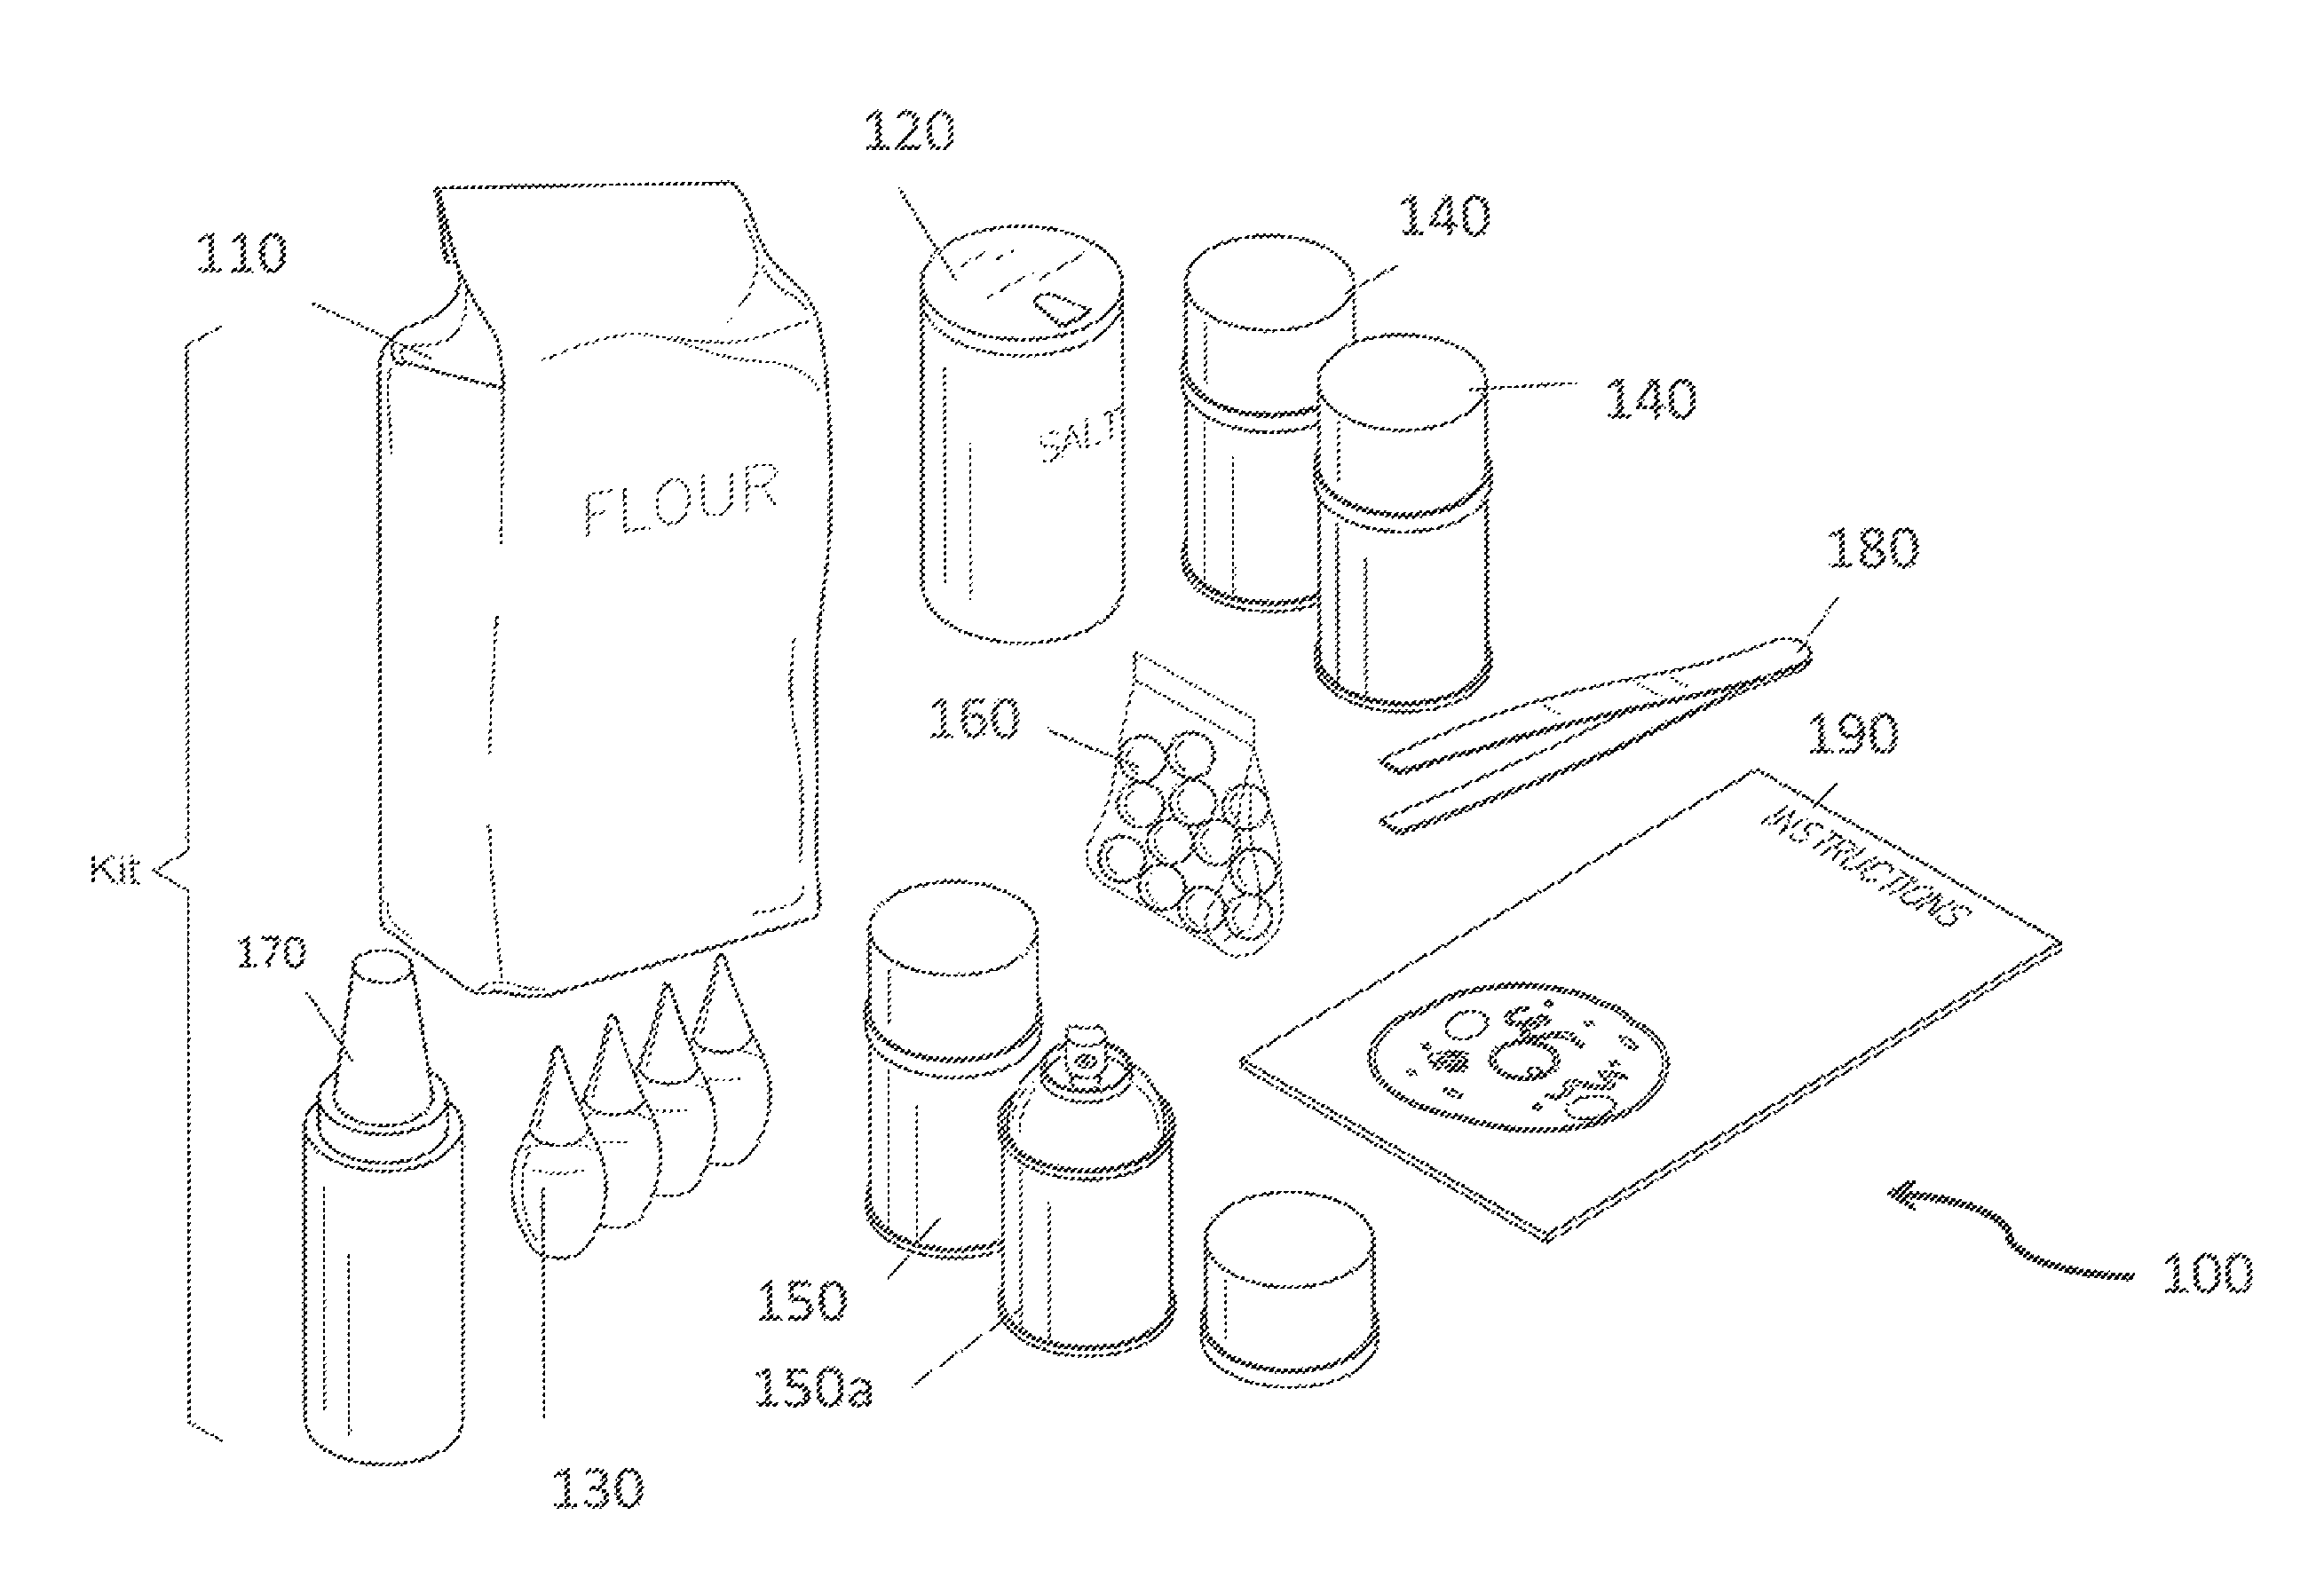 Kit for building a model of a cell